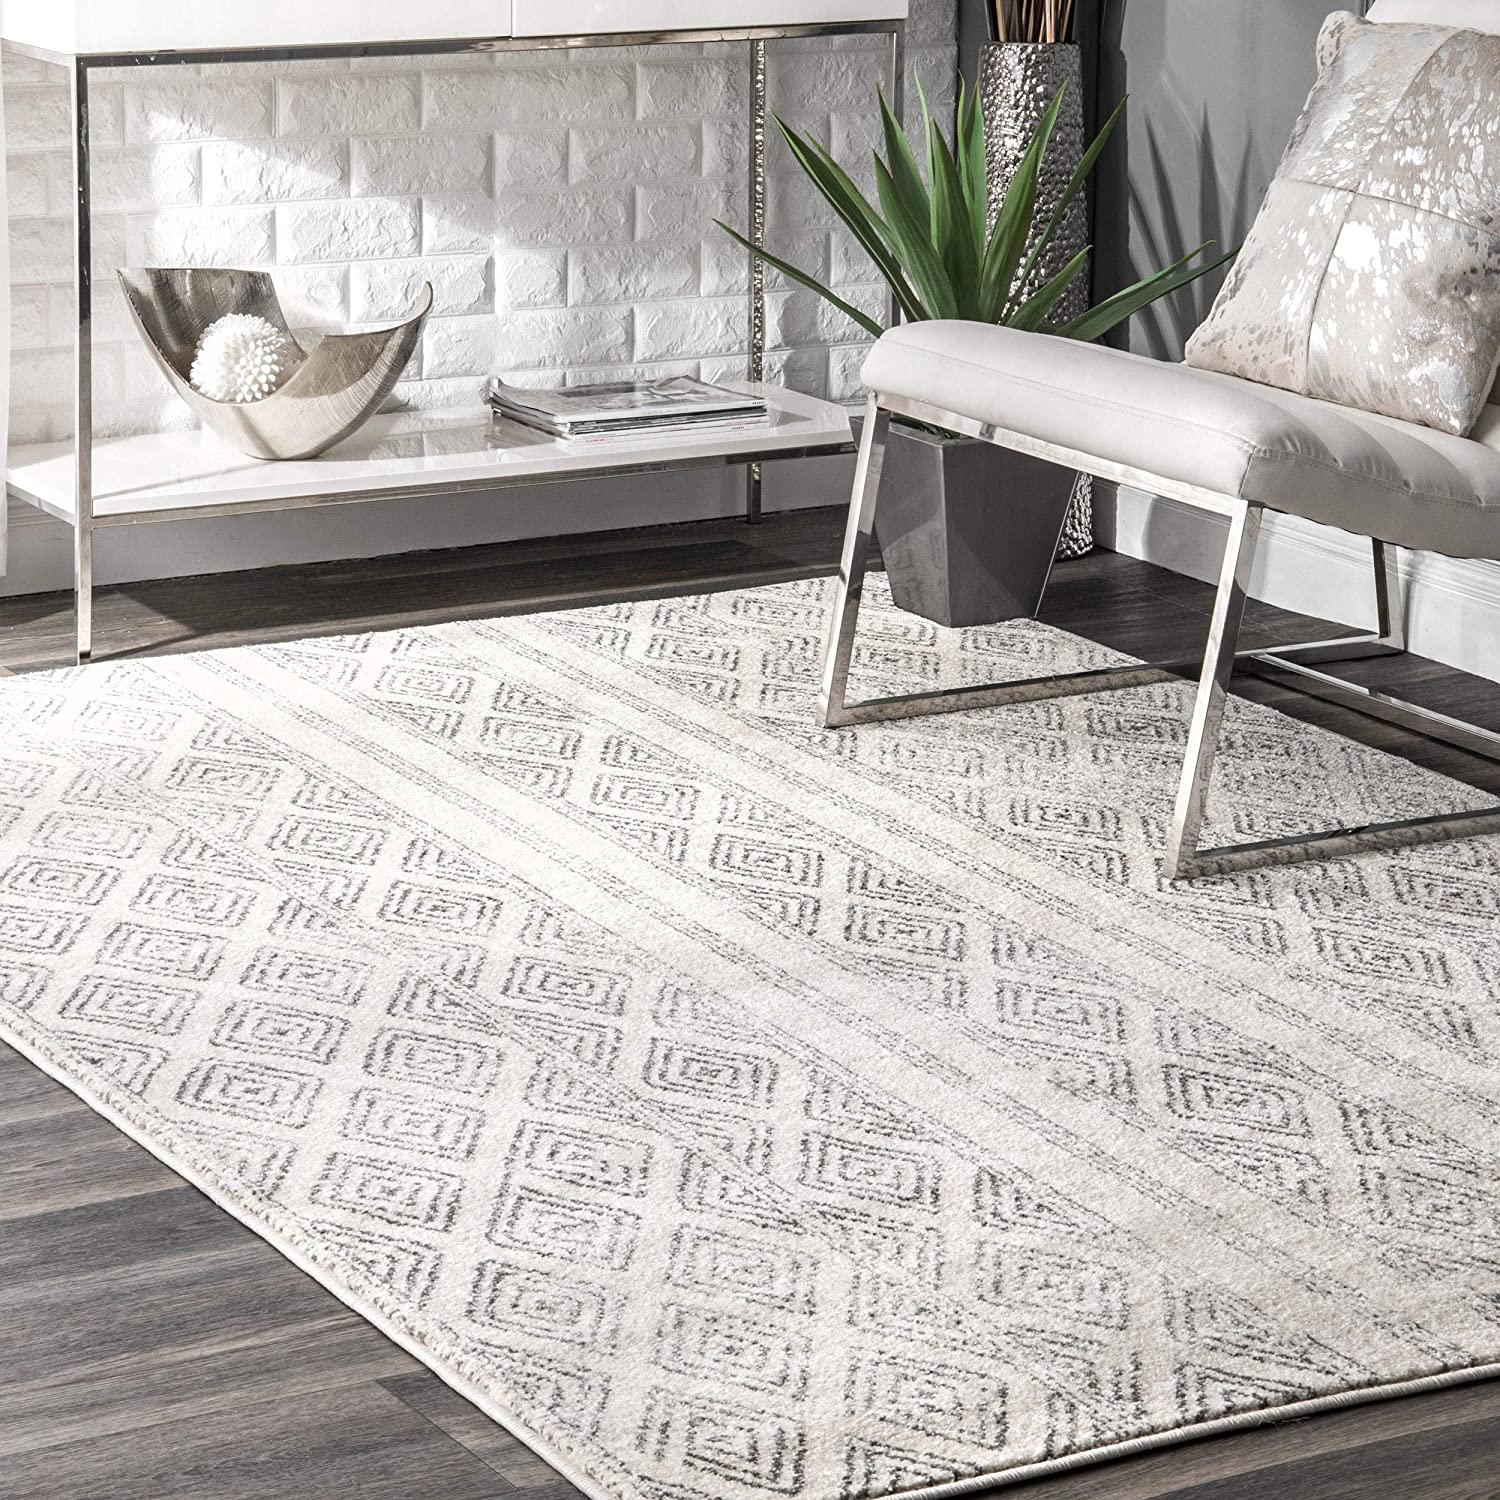 rectangular rug with gray and white patterns